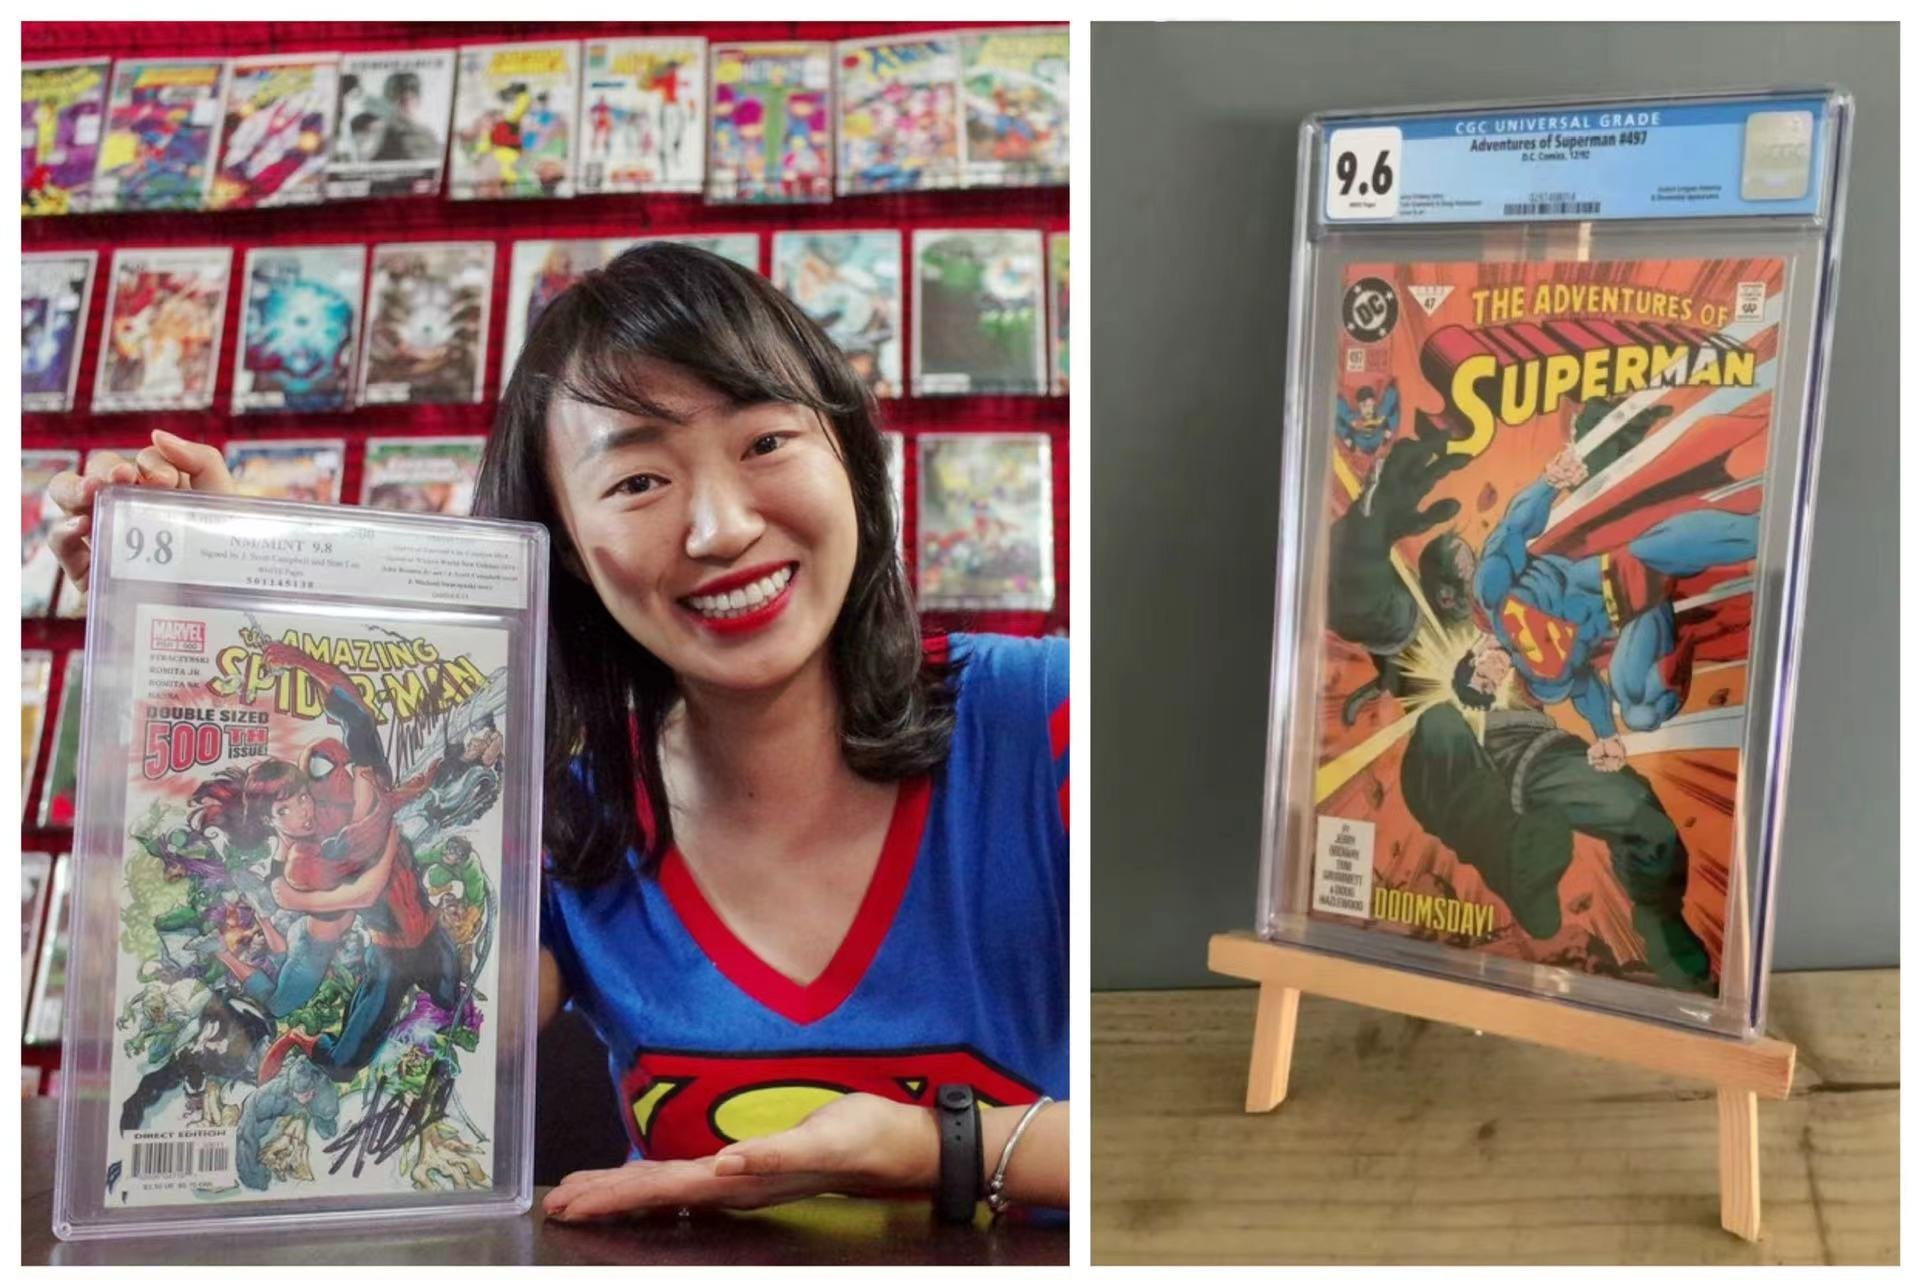 Ashley Huang: CGC graded comics come in a special box and are valued by collectors.